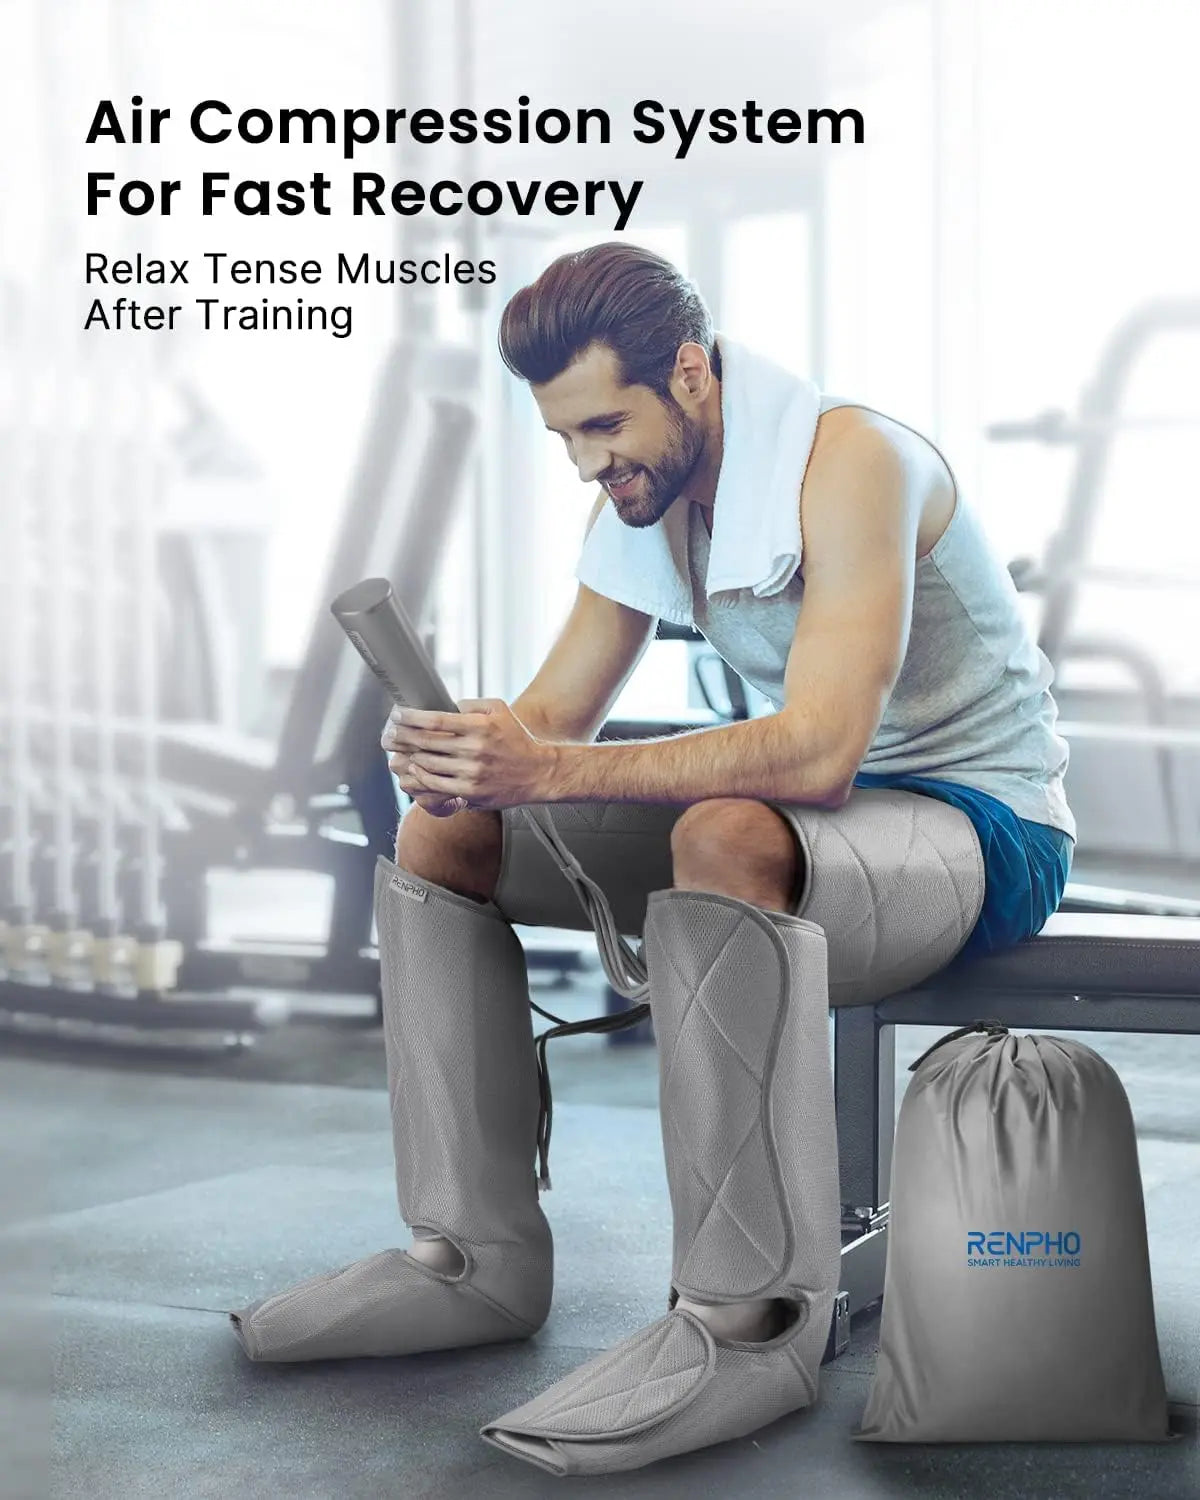 A man in a gym sits on a bench, wearing an Aeria Ultimate Thermal Full Leg Massager on his legs and feet. He has a towel around his neck and holds a remote control for the device. Text on the image reads "Aeria Ultimate Thermal Full Leg Massager For Fast Recovery: Relax Tense Muscles After Training with Wrap-Around Solution." An Renpho EU-brand bag is on the floor.